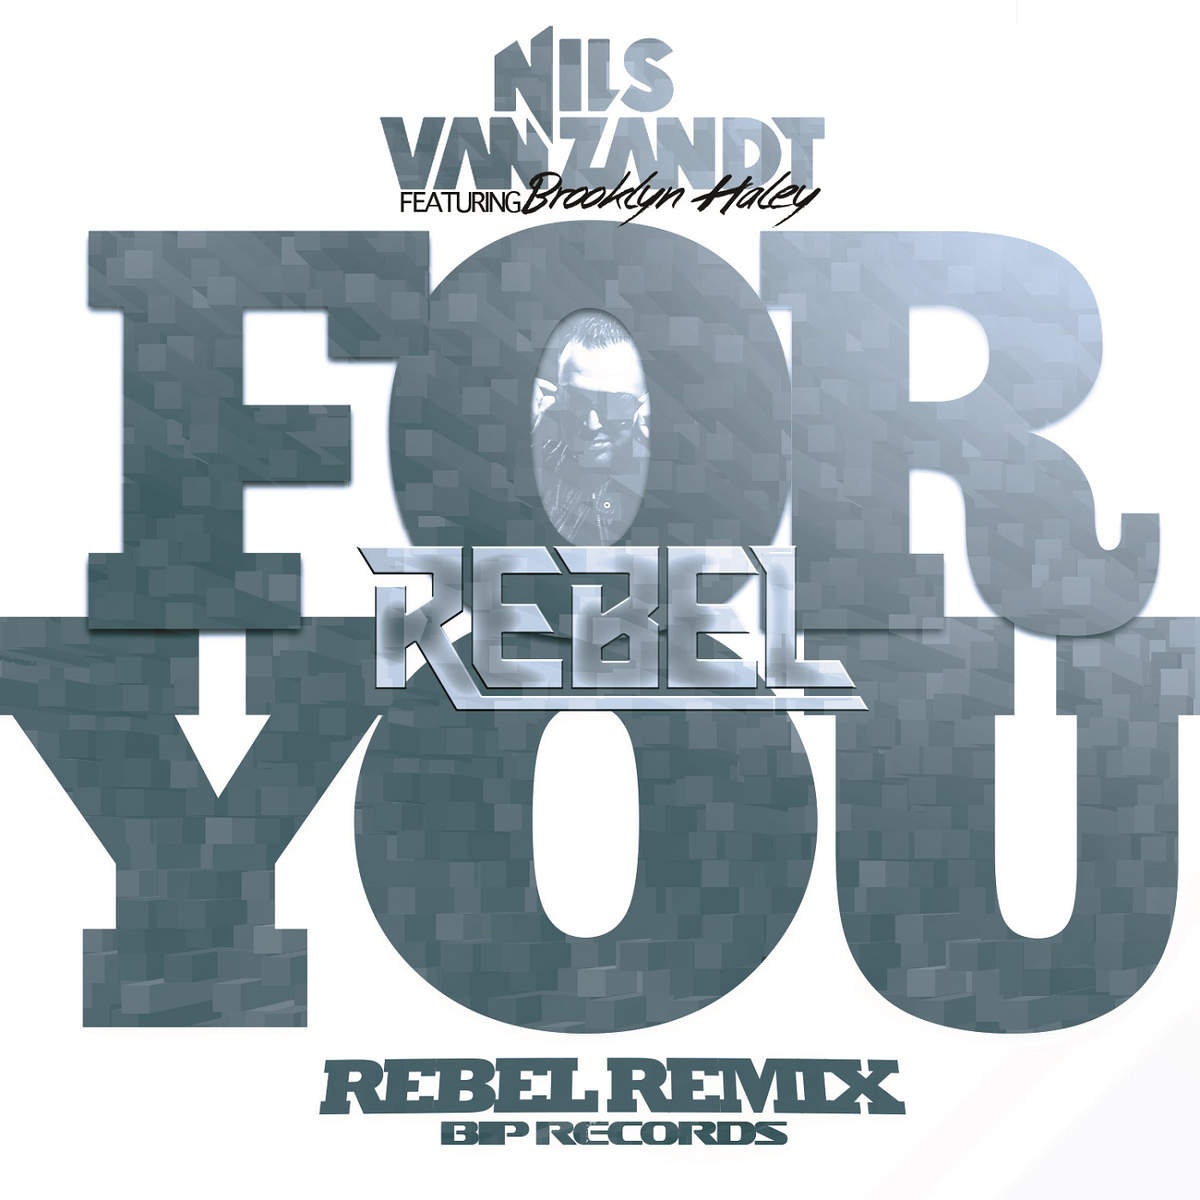 For You (Rebel Original Extended Remix)